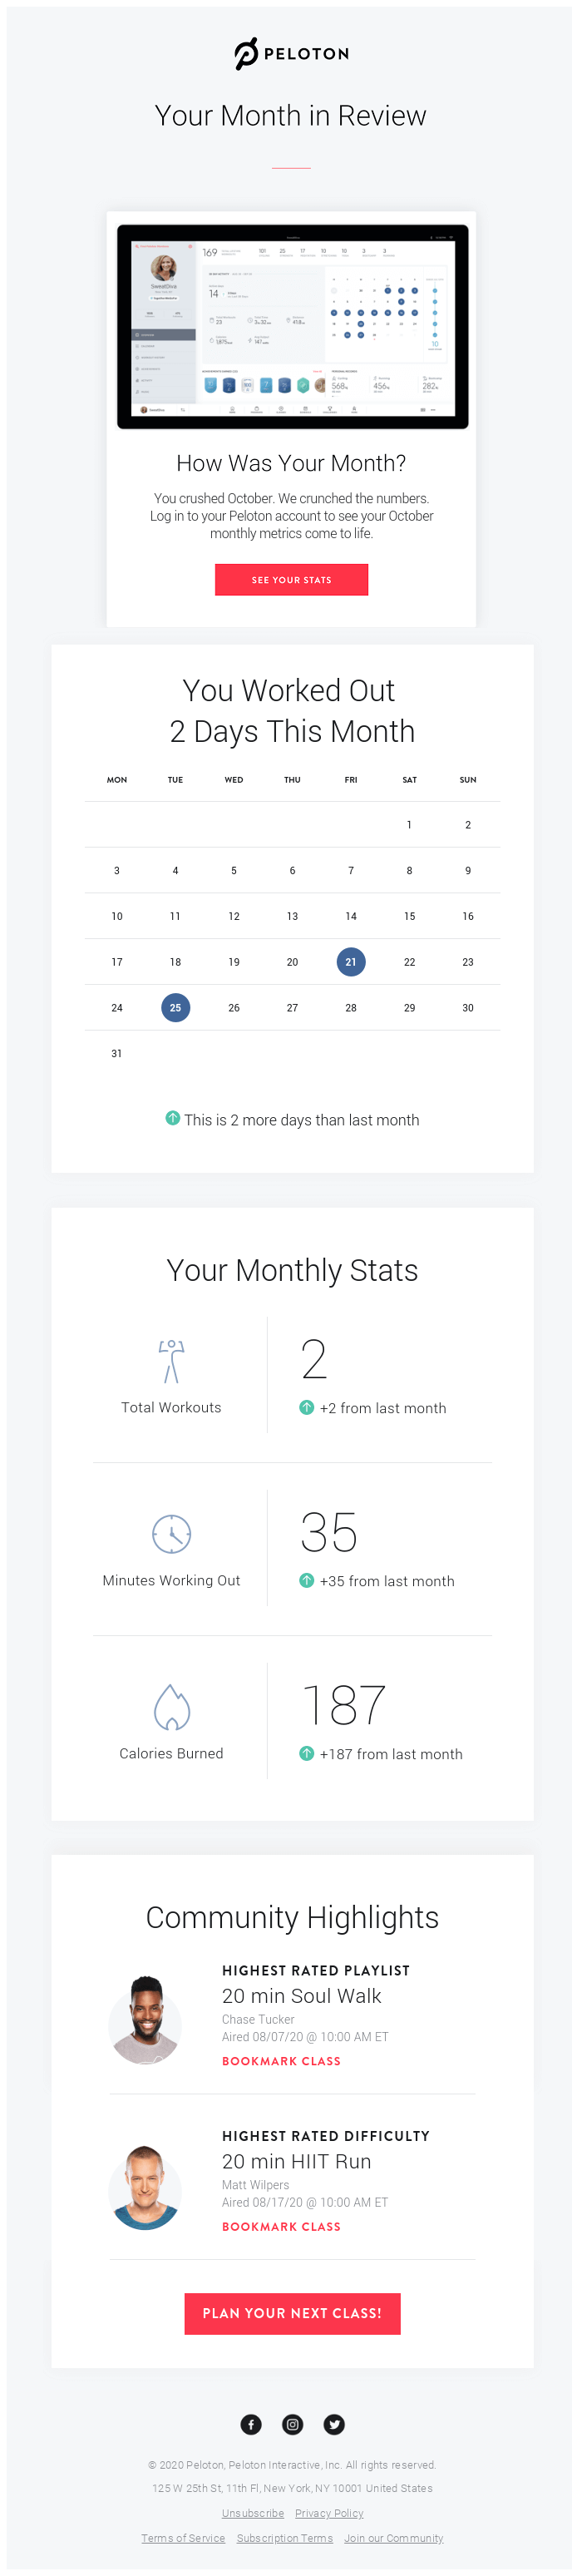 Your August with Peloton